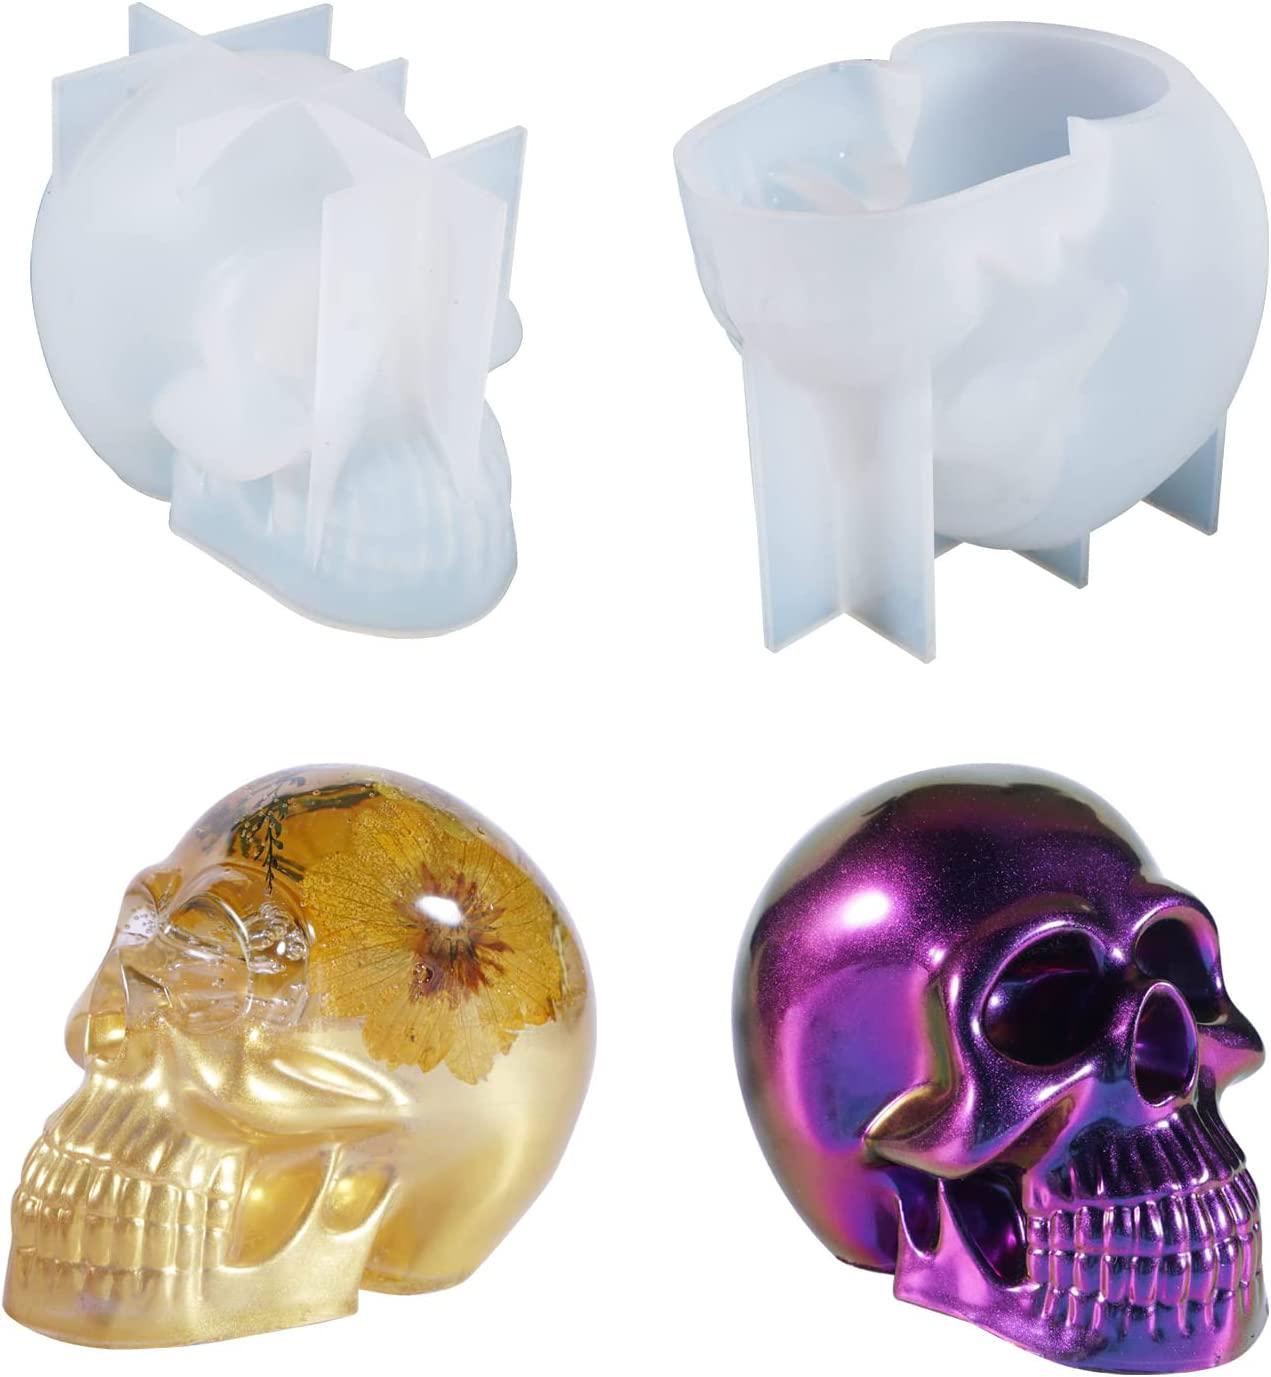 LUXWIN, LUXWIN Skull Resin Molds,Large 3D Skull Candle Molds for Candle Making,Resin Casting Art Crafts Halloween Party Supplies,Home Decor